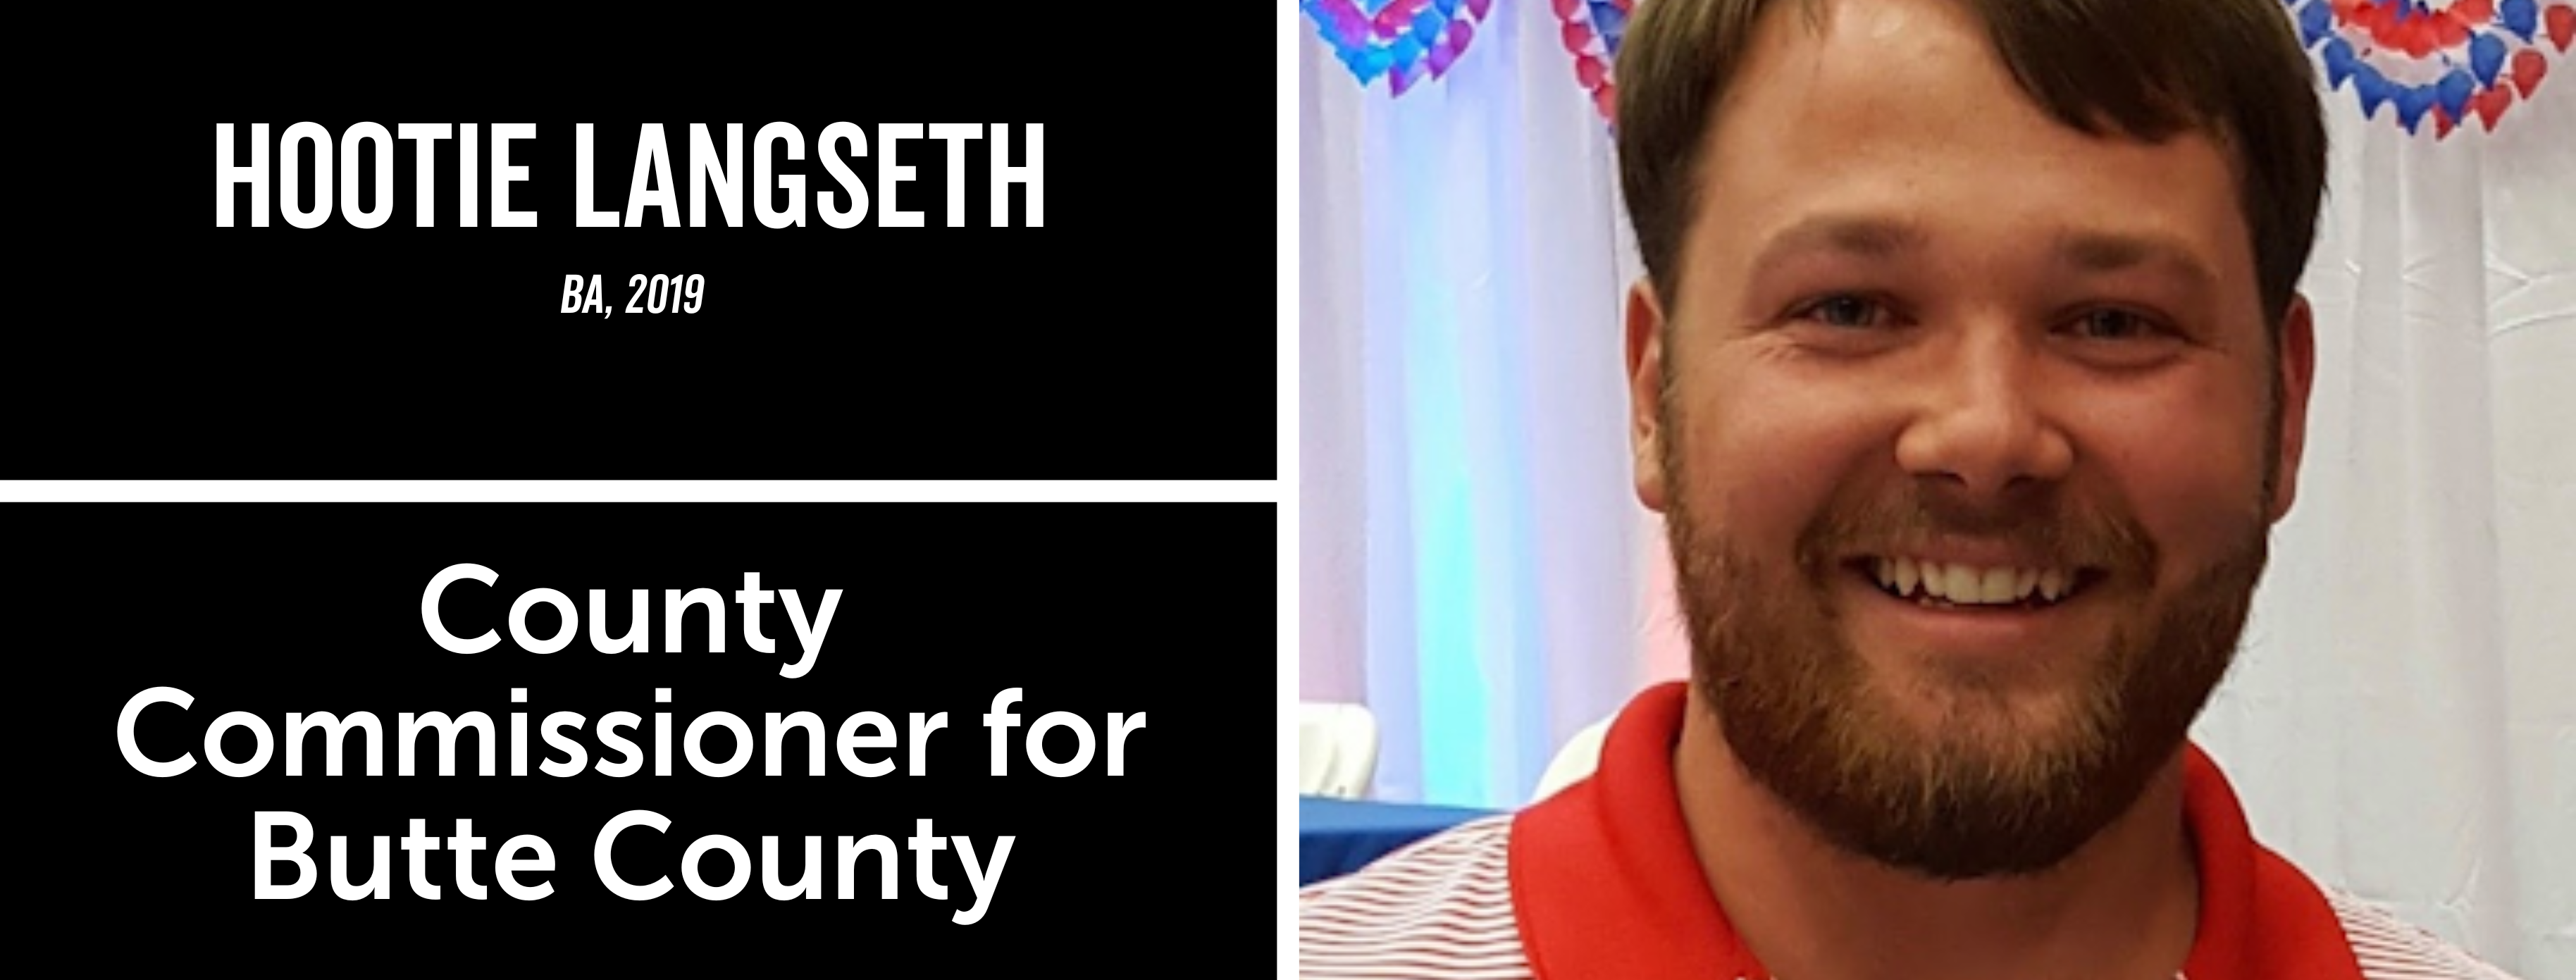 Alum Hootie Langseth, BA 2019, County Commissioner for Butte County